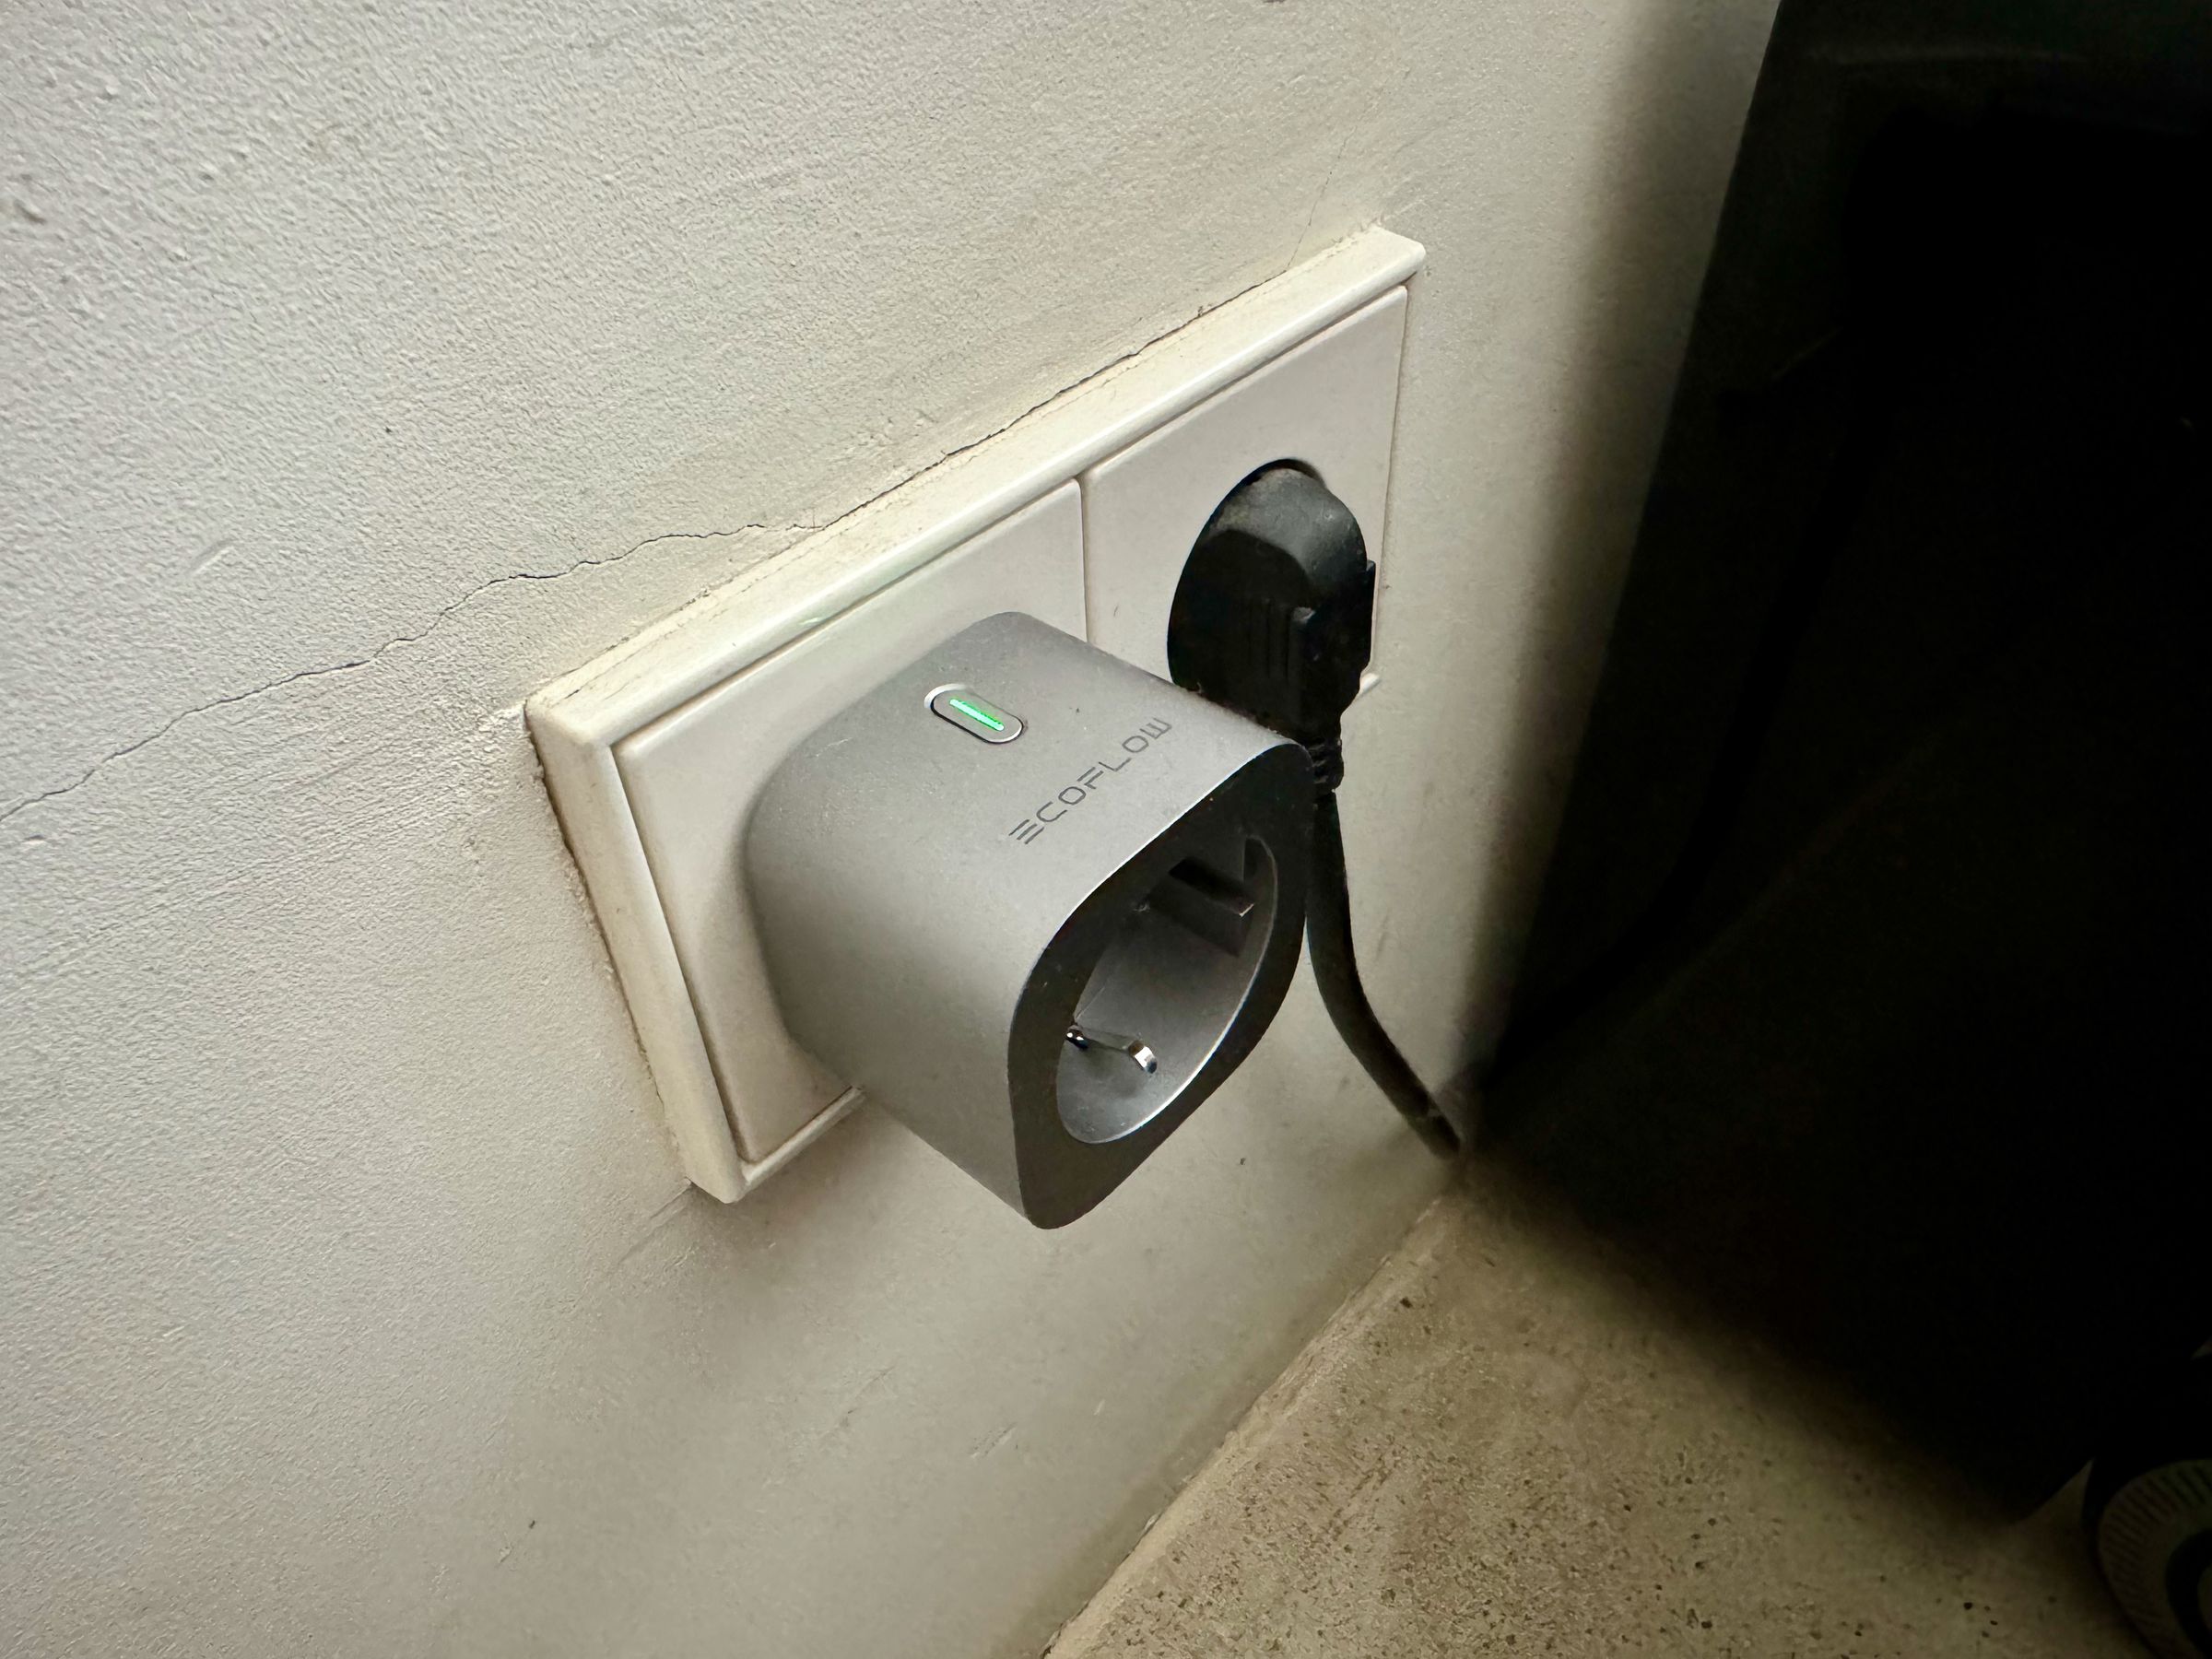 EcoFlow’s smart plug works with the PowerStream to control the flow of power.